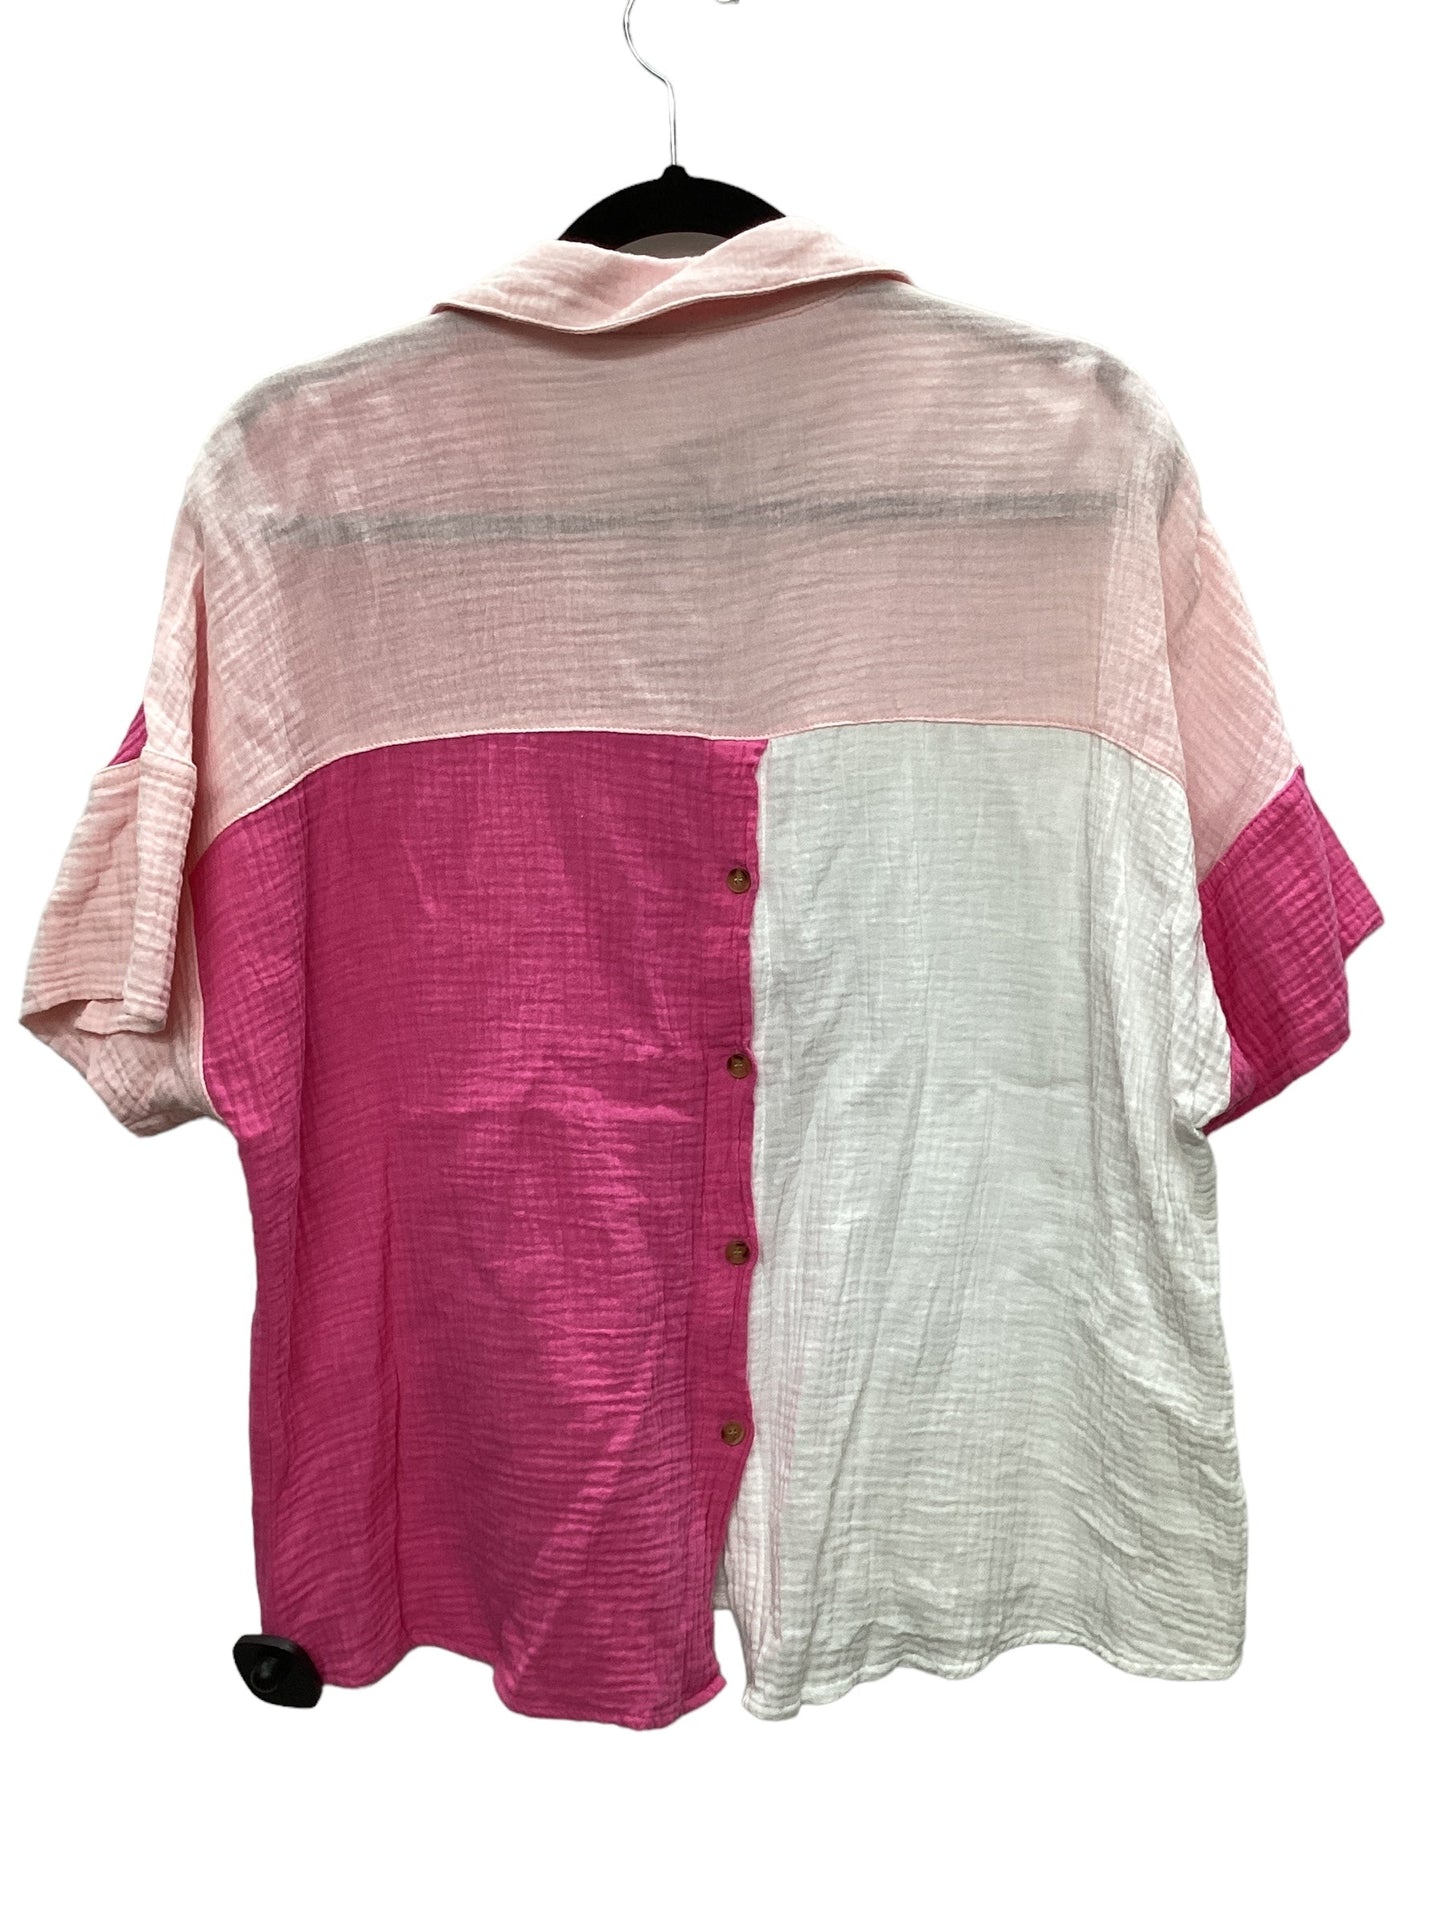 Pink Top Short Sleeve Shein, Size M